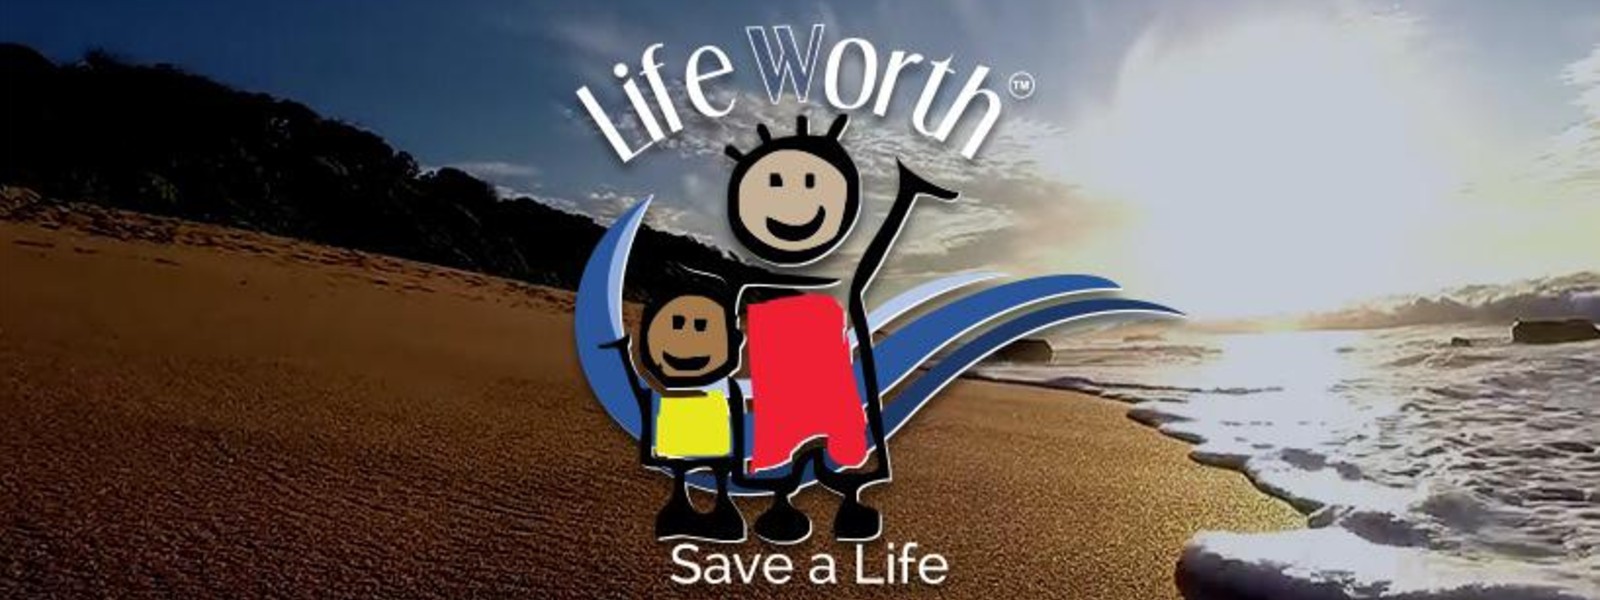 Project ' LIFE-WORTH ' on beach safety launched